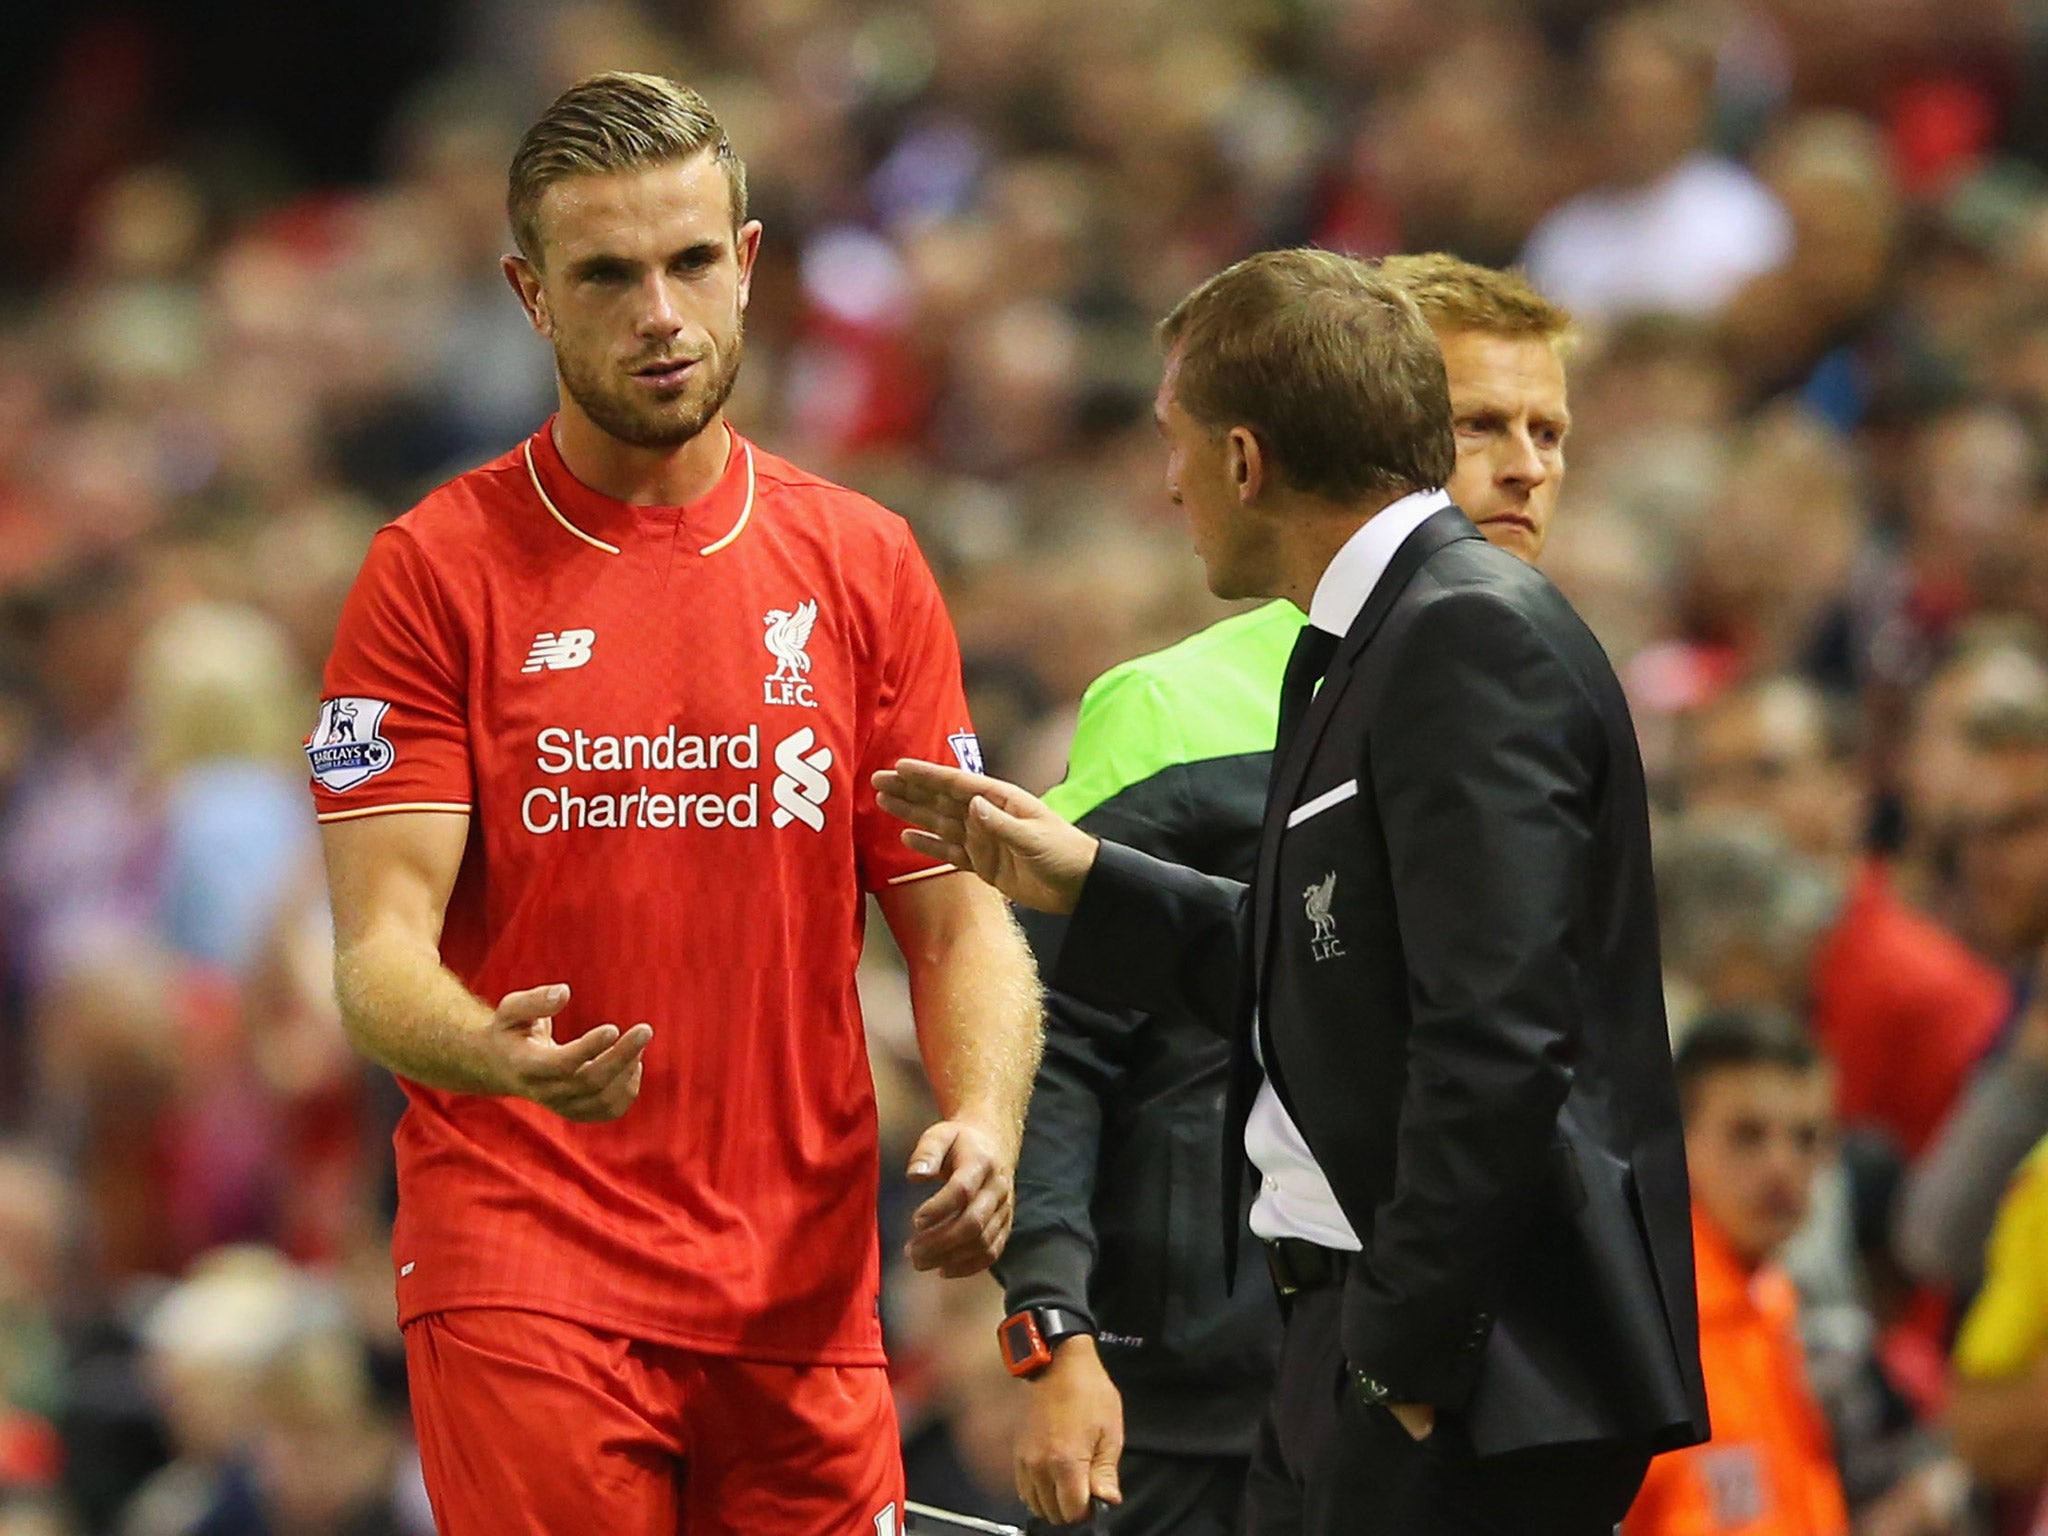 Jordan Henderson comes off the field against Bournemouth